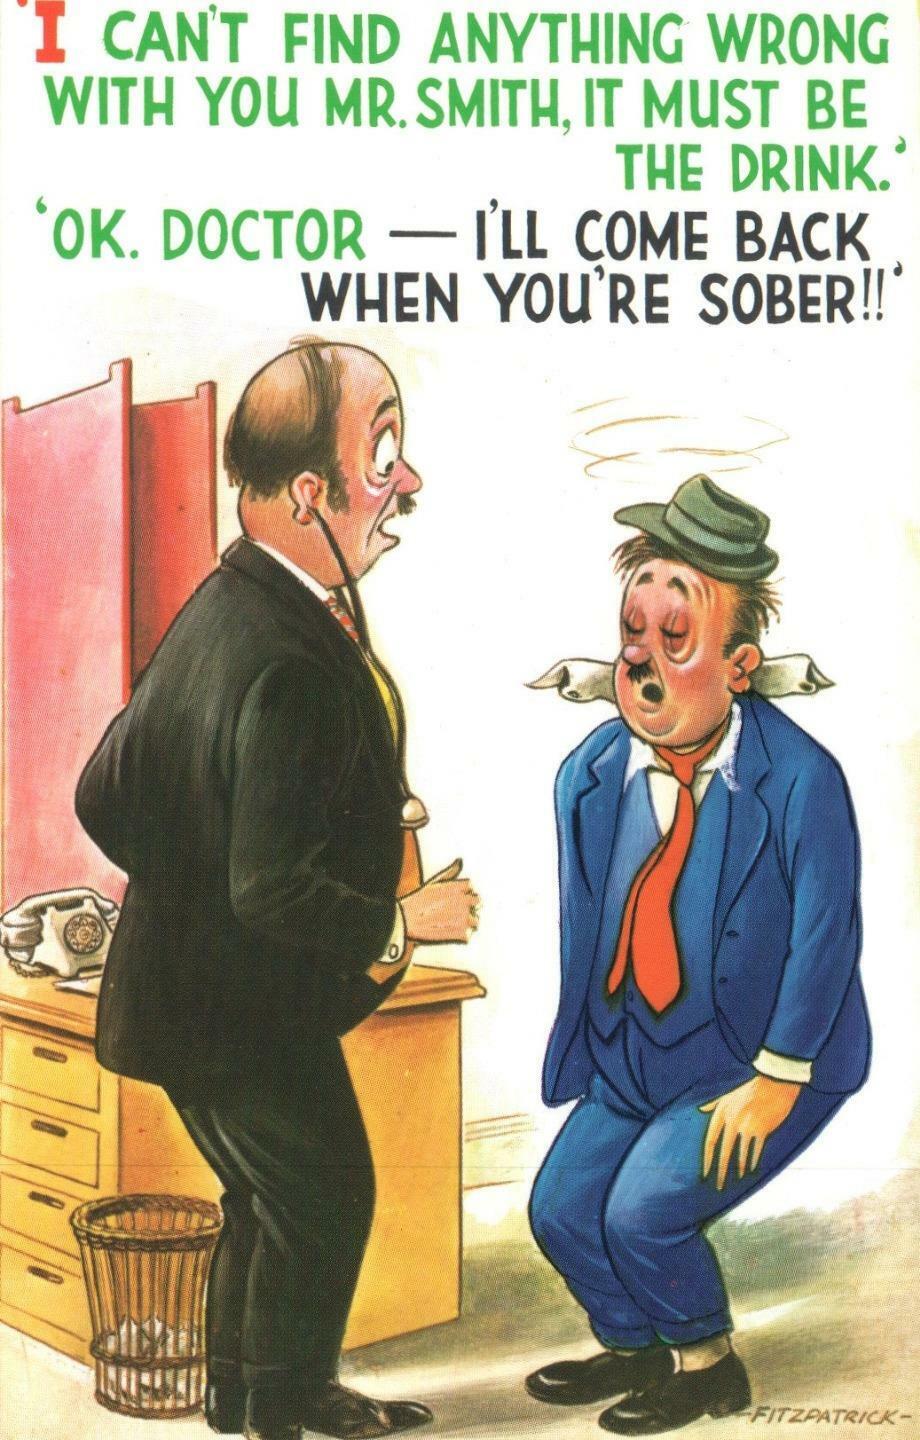 COMIC BAMFORTH DOCTOR CAN'T FIND ANYTHING WRONG with DRUNK MAN POSTCARD